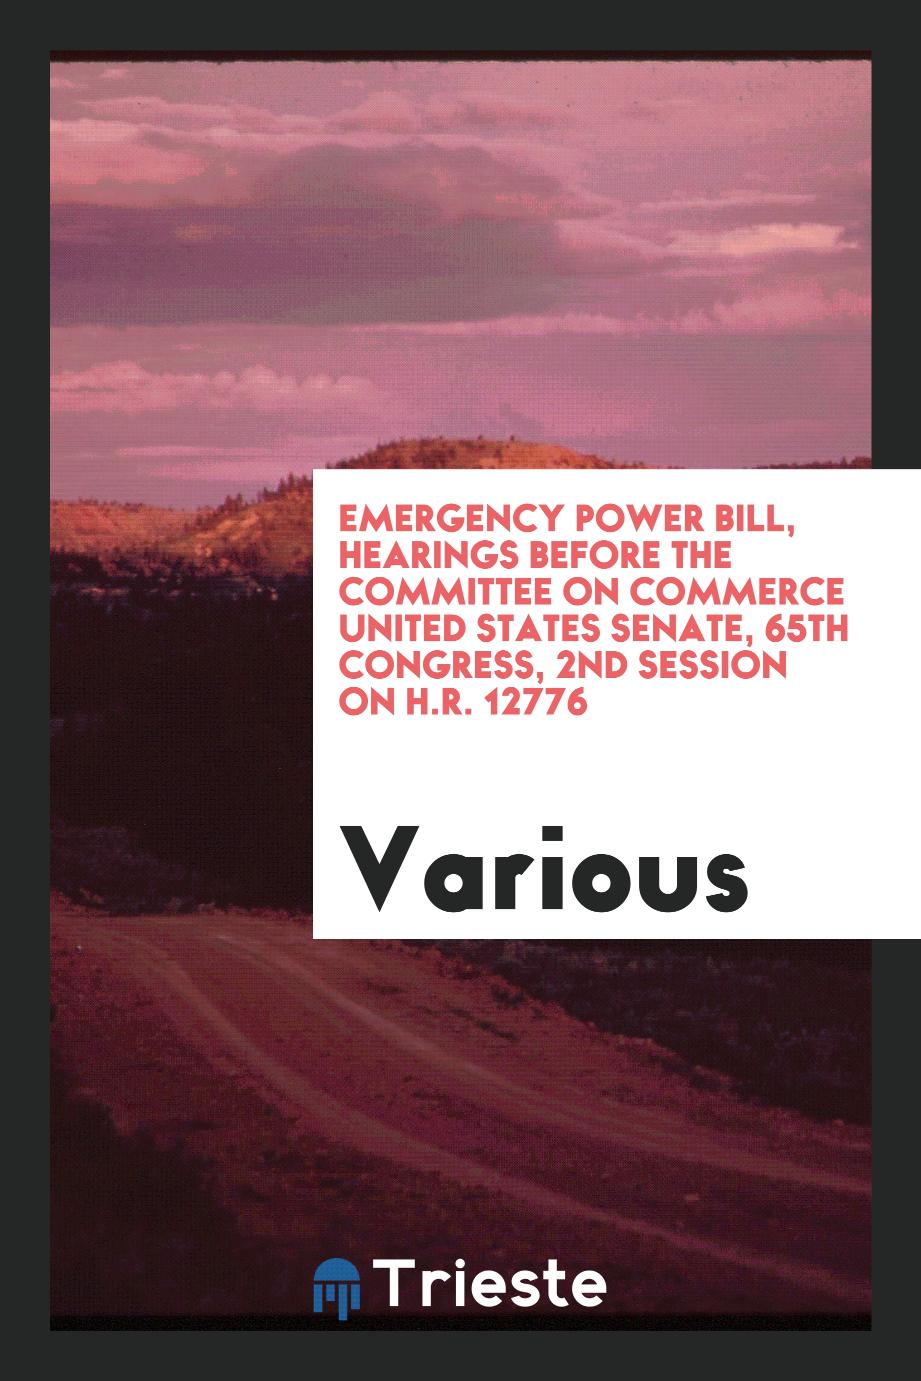 Emergency Power Bill, Hearings before the Committee on Commerce United States Senate, 65th Congress, 2nd Session on H.R. 12776